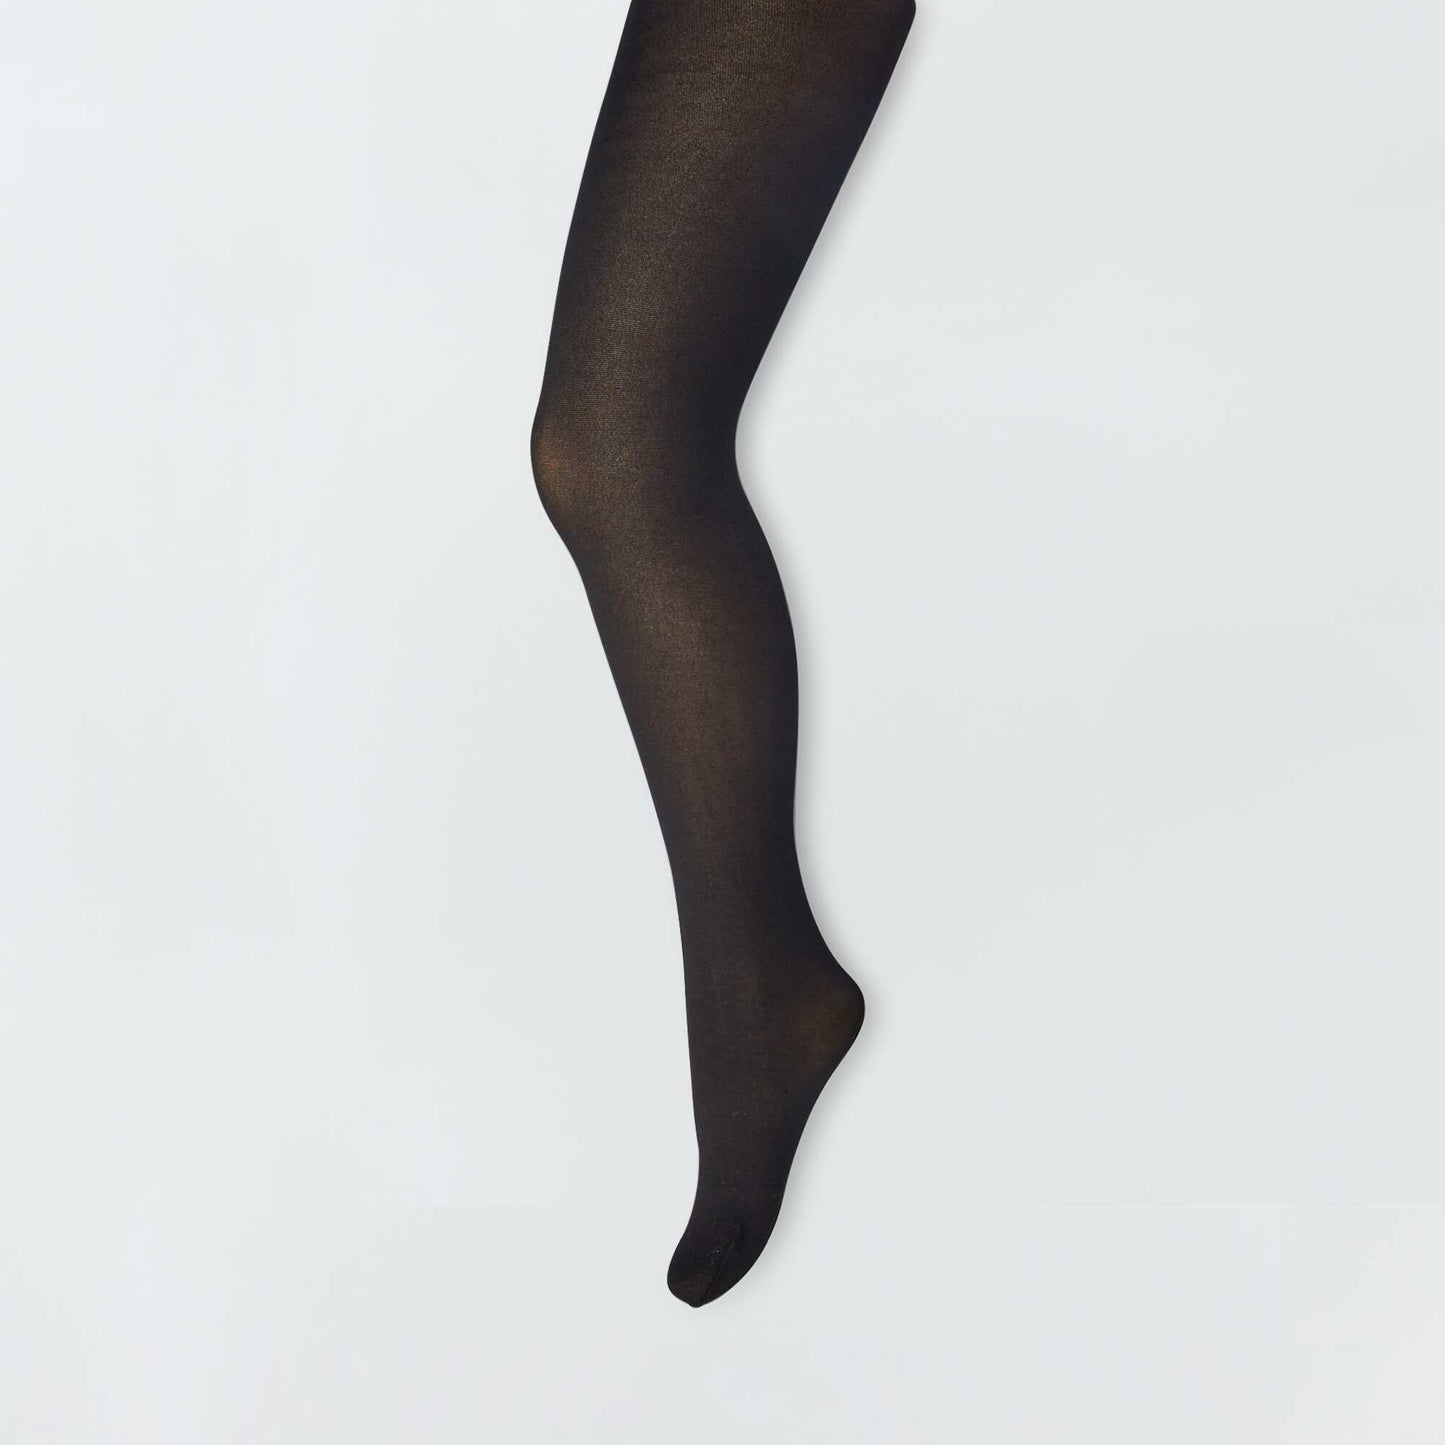 Pack of 2 pairs of tights black